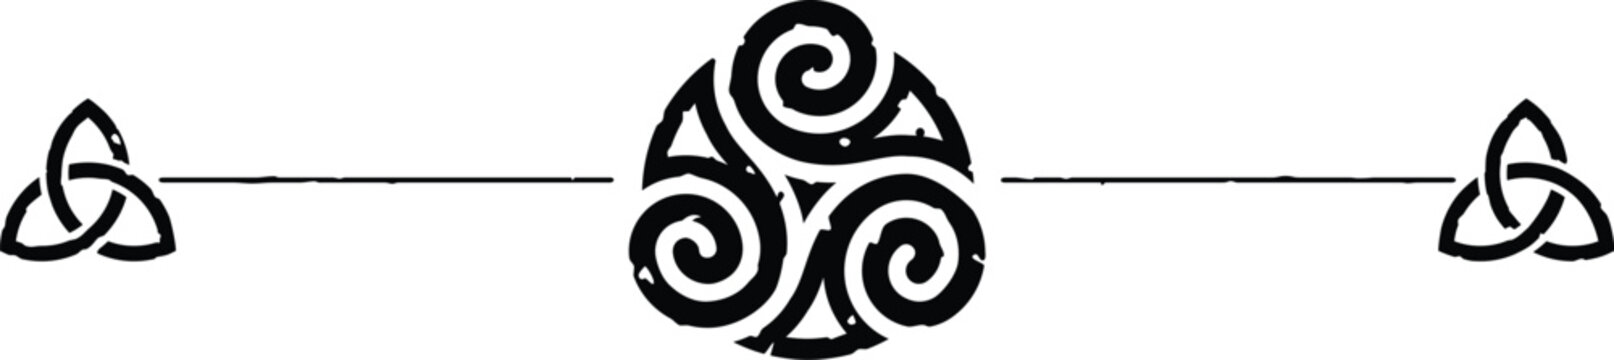 Celtic Symbols Header with Inverted Triskele and Triquetra